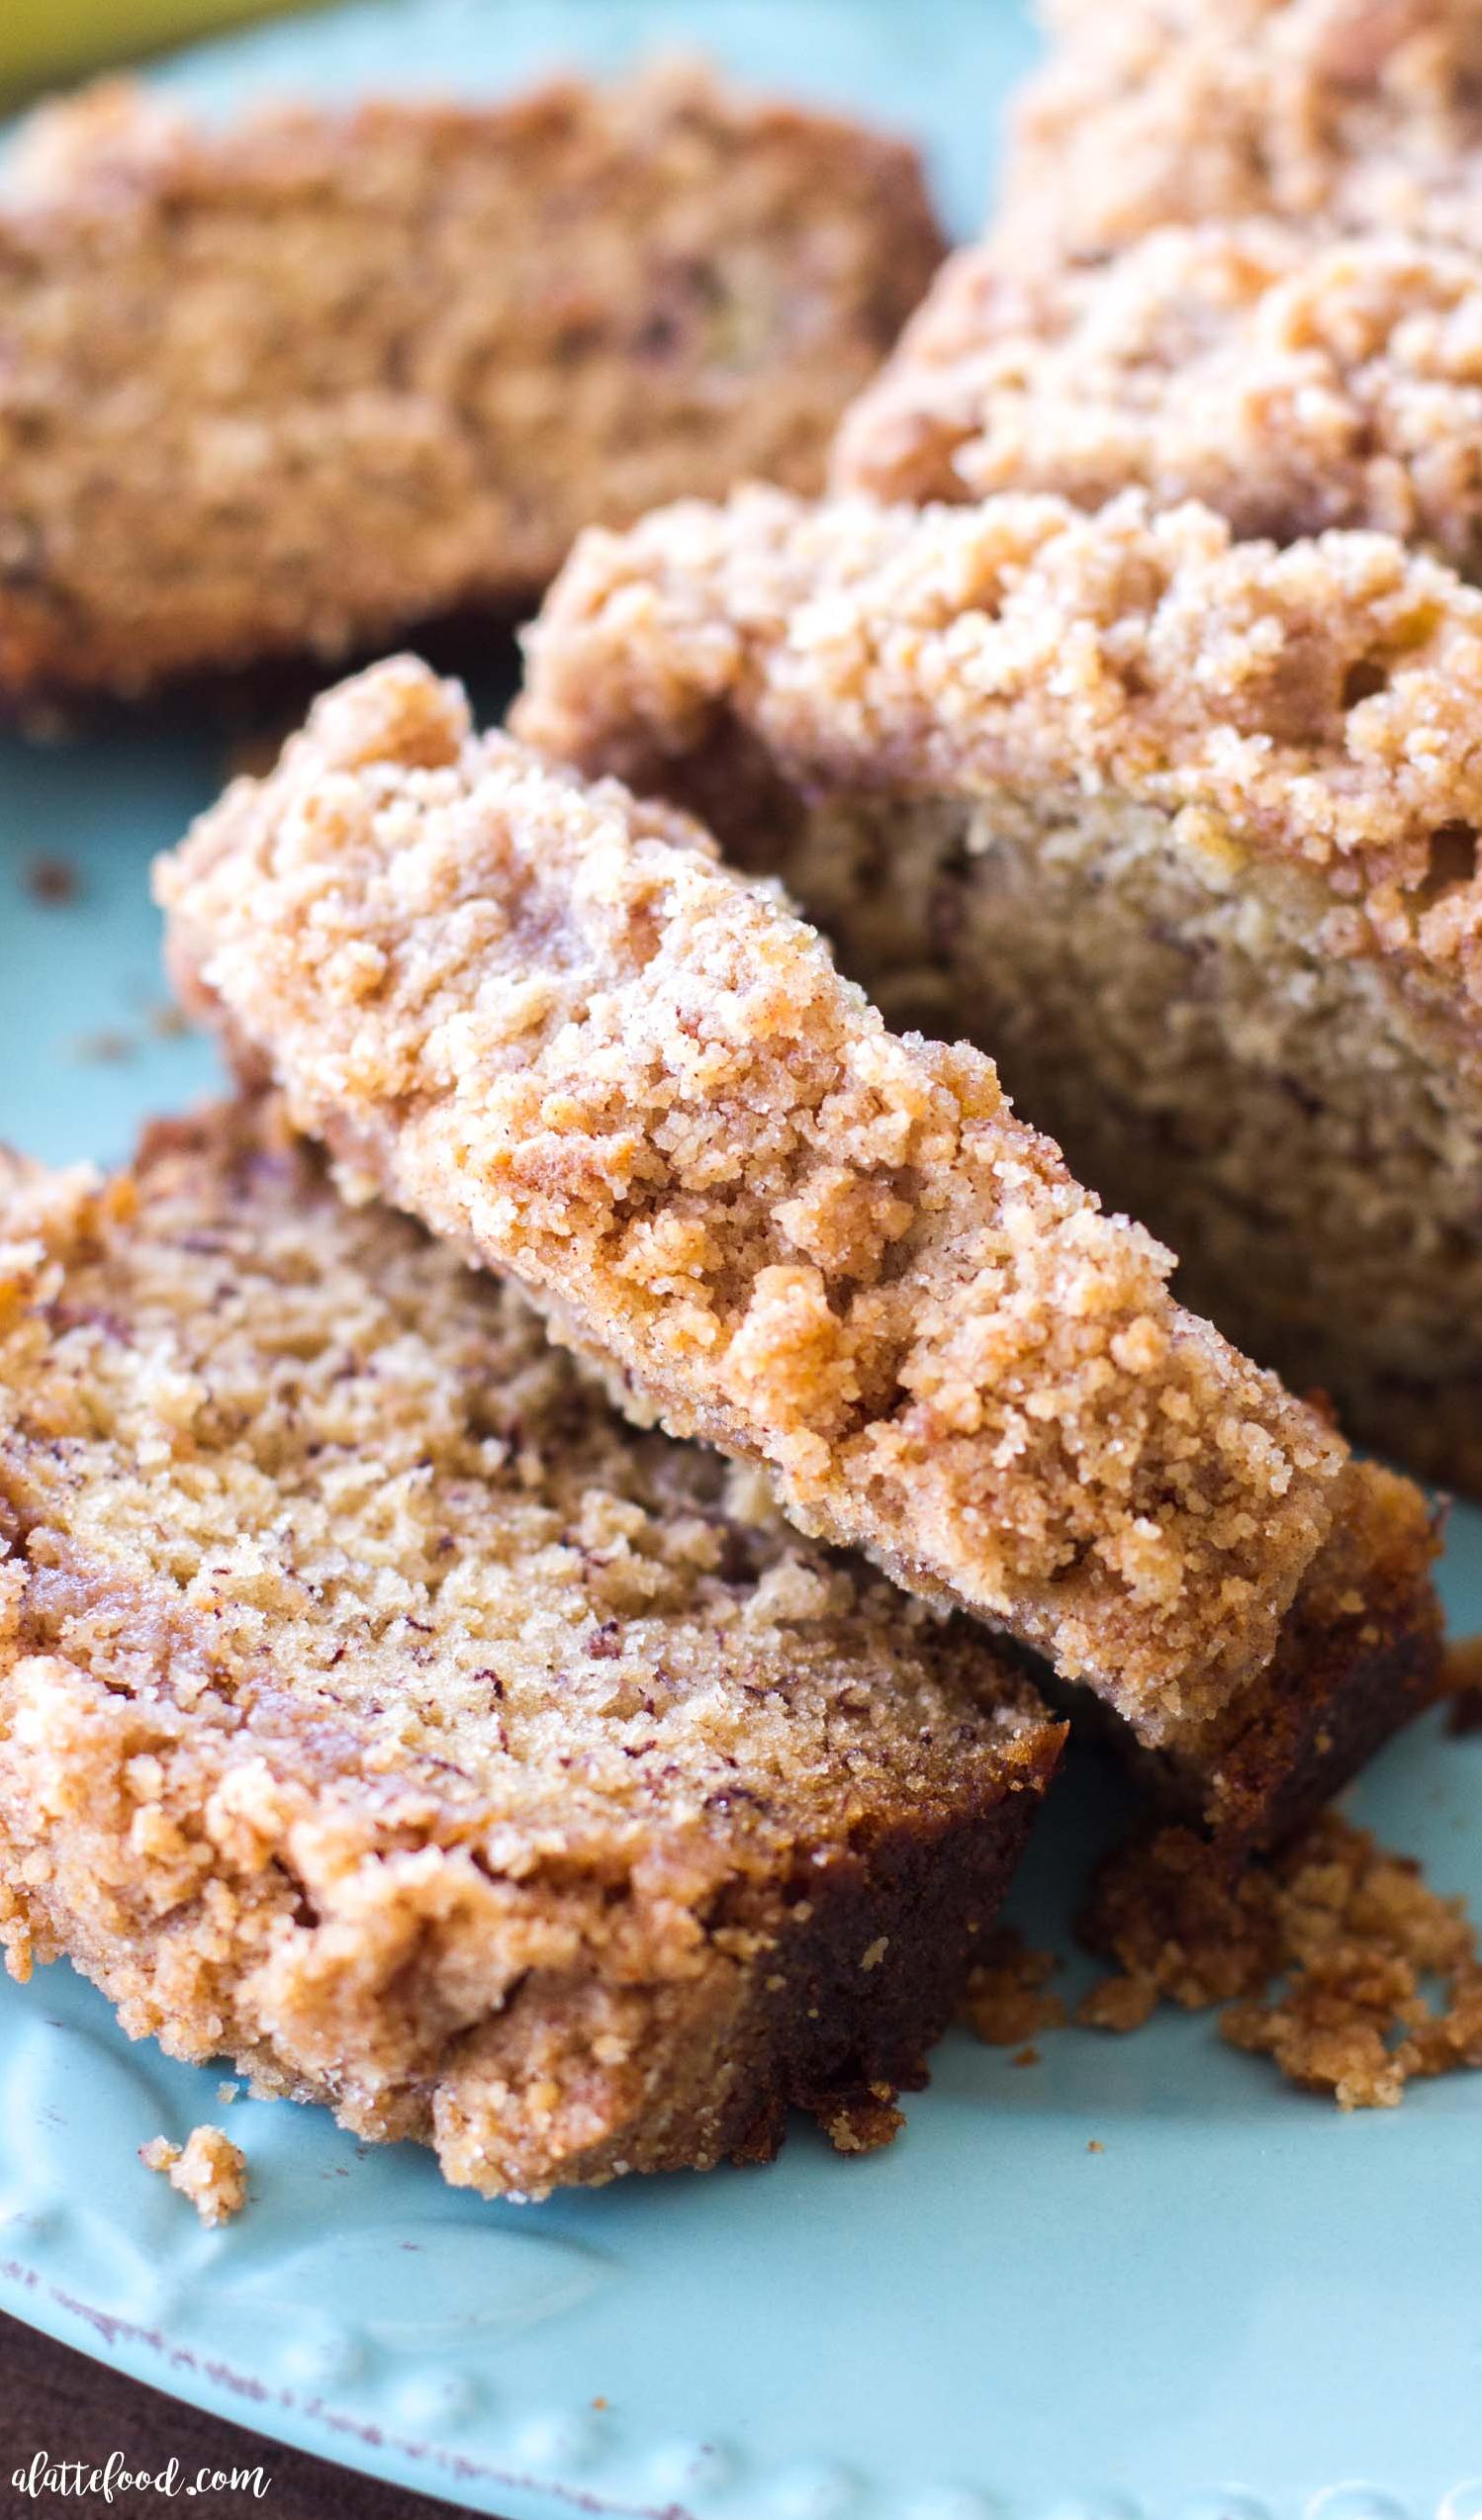  Satisfy your cravings with this heavenly coffee cake.